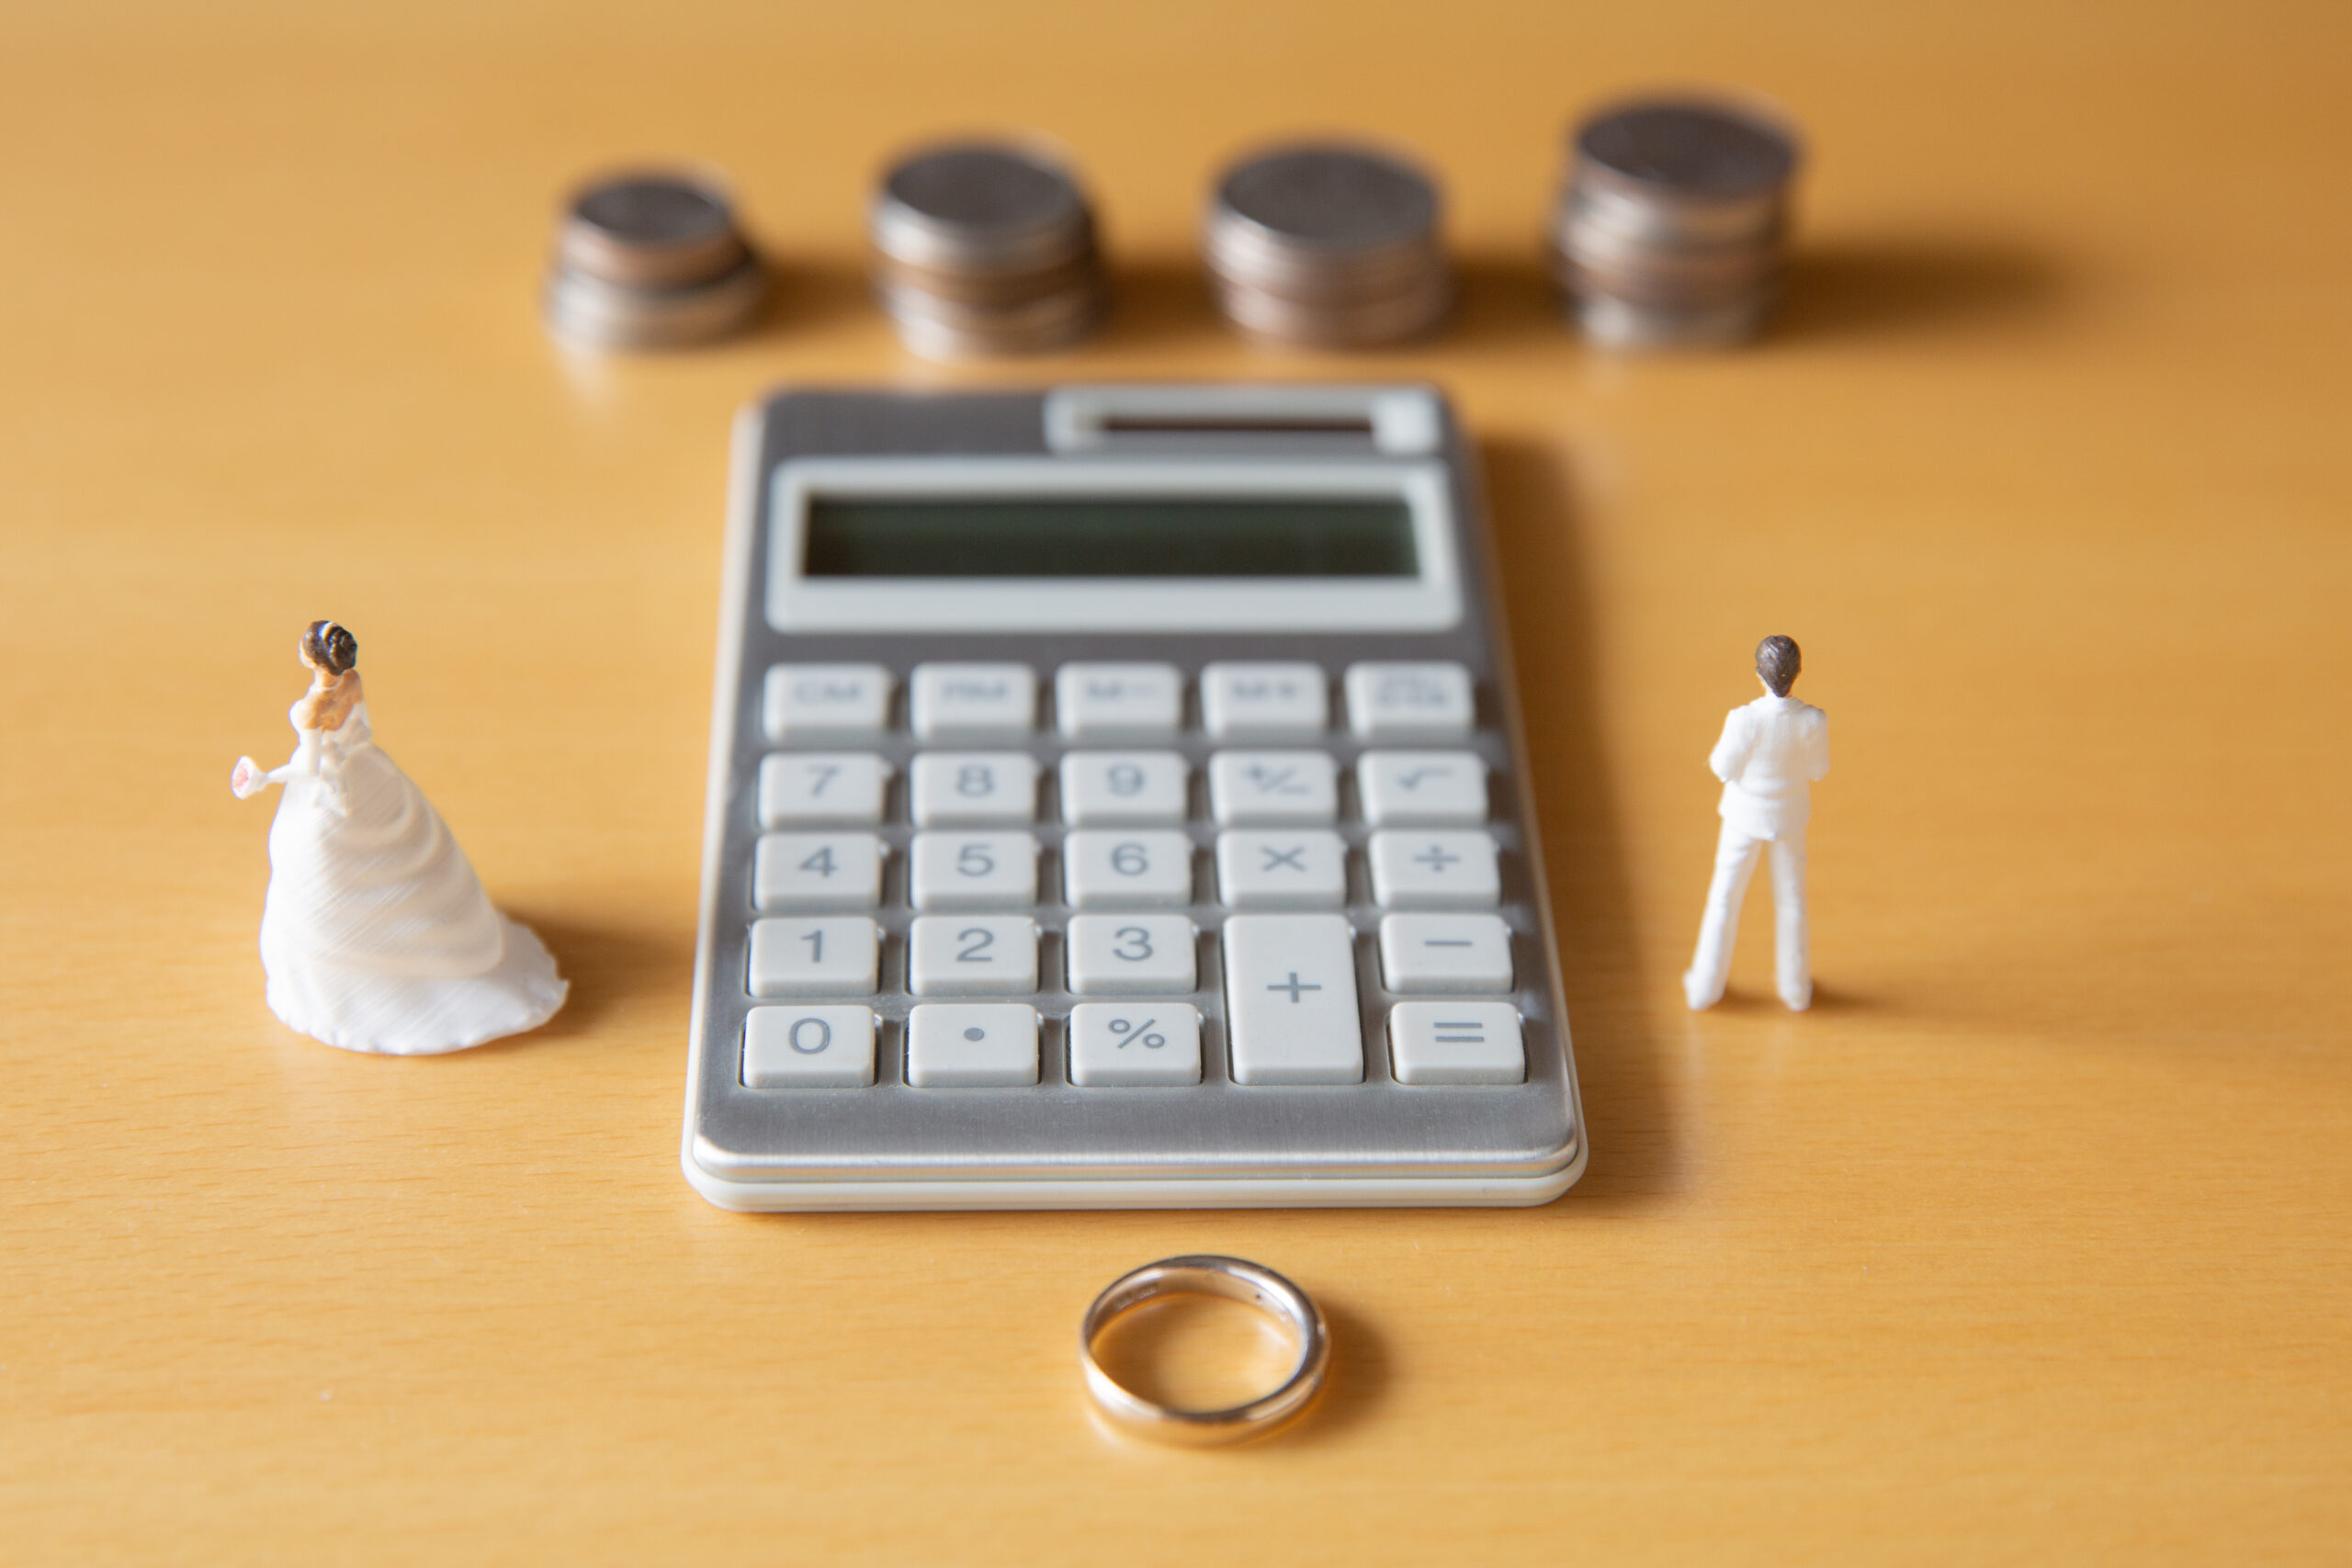 Schenkeveld Advocaten - Image,Of,Divorce,,Money,And,Troubles,With,Calculator,And,Ring.